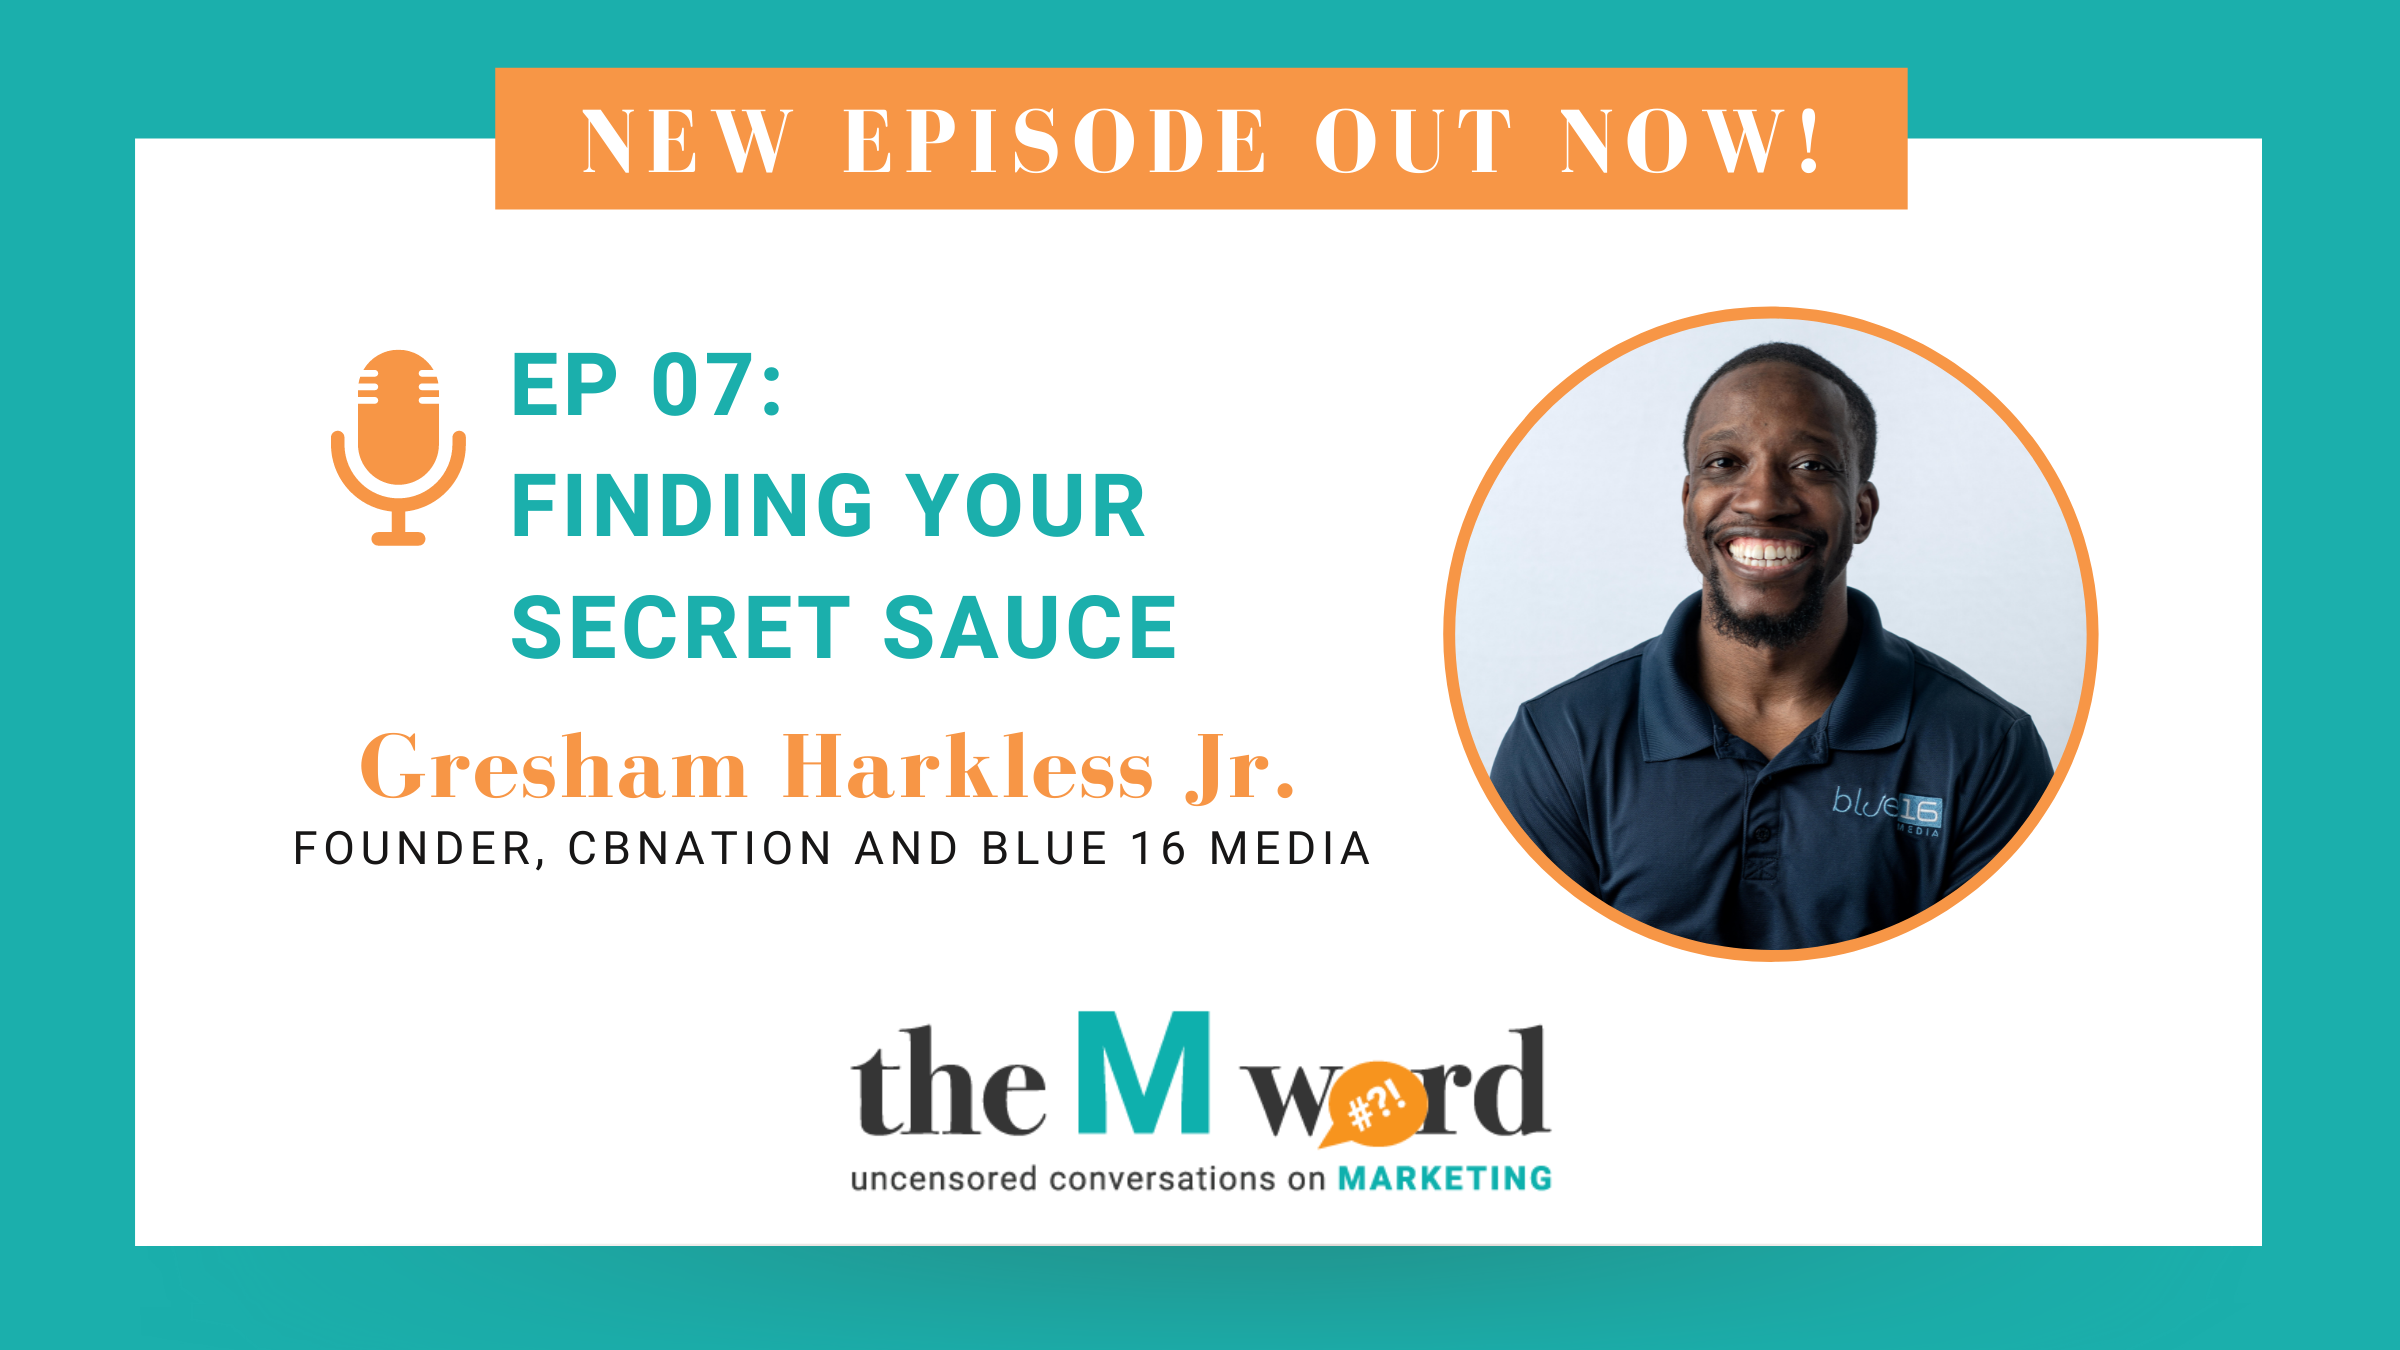 Episode 7 of The M Word podcast with Gresham Harkless Jr., founder of CBNation and Blue 16 Media.